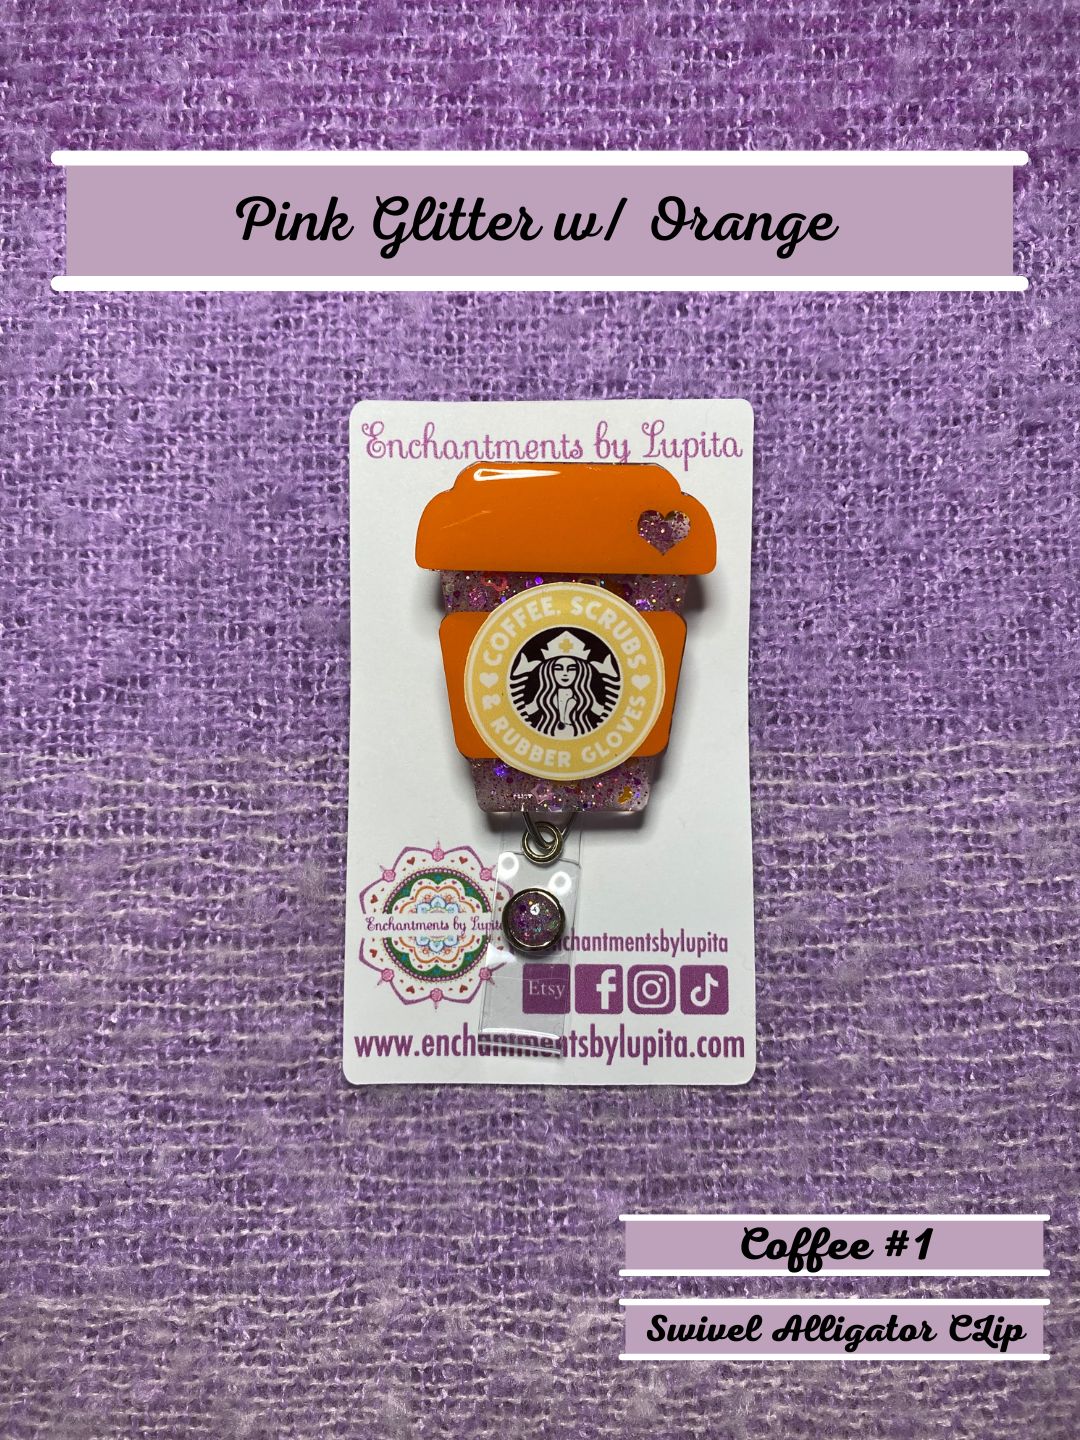 Coffee Scrubs Pink - Acrylic Badge Reel Blank and Matching Sticker